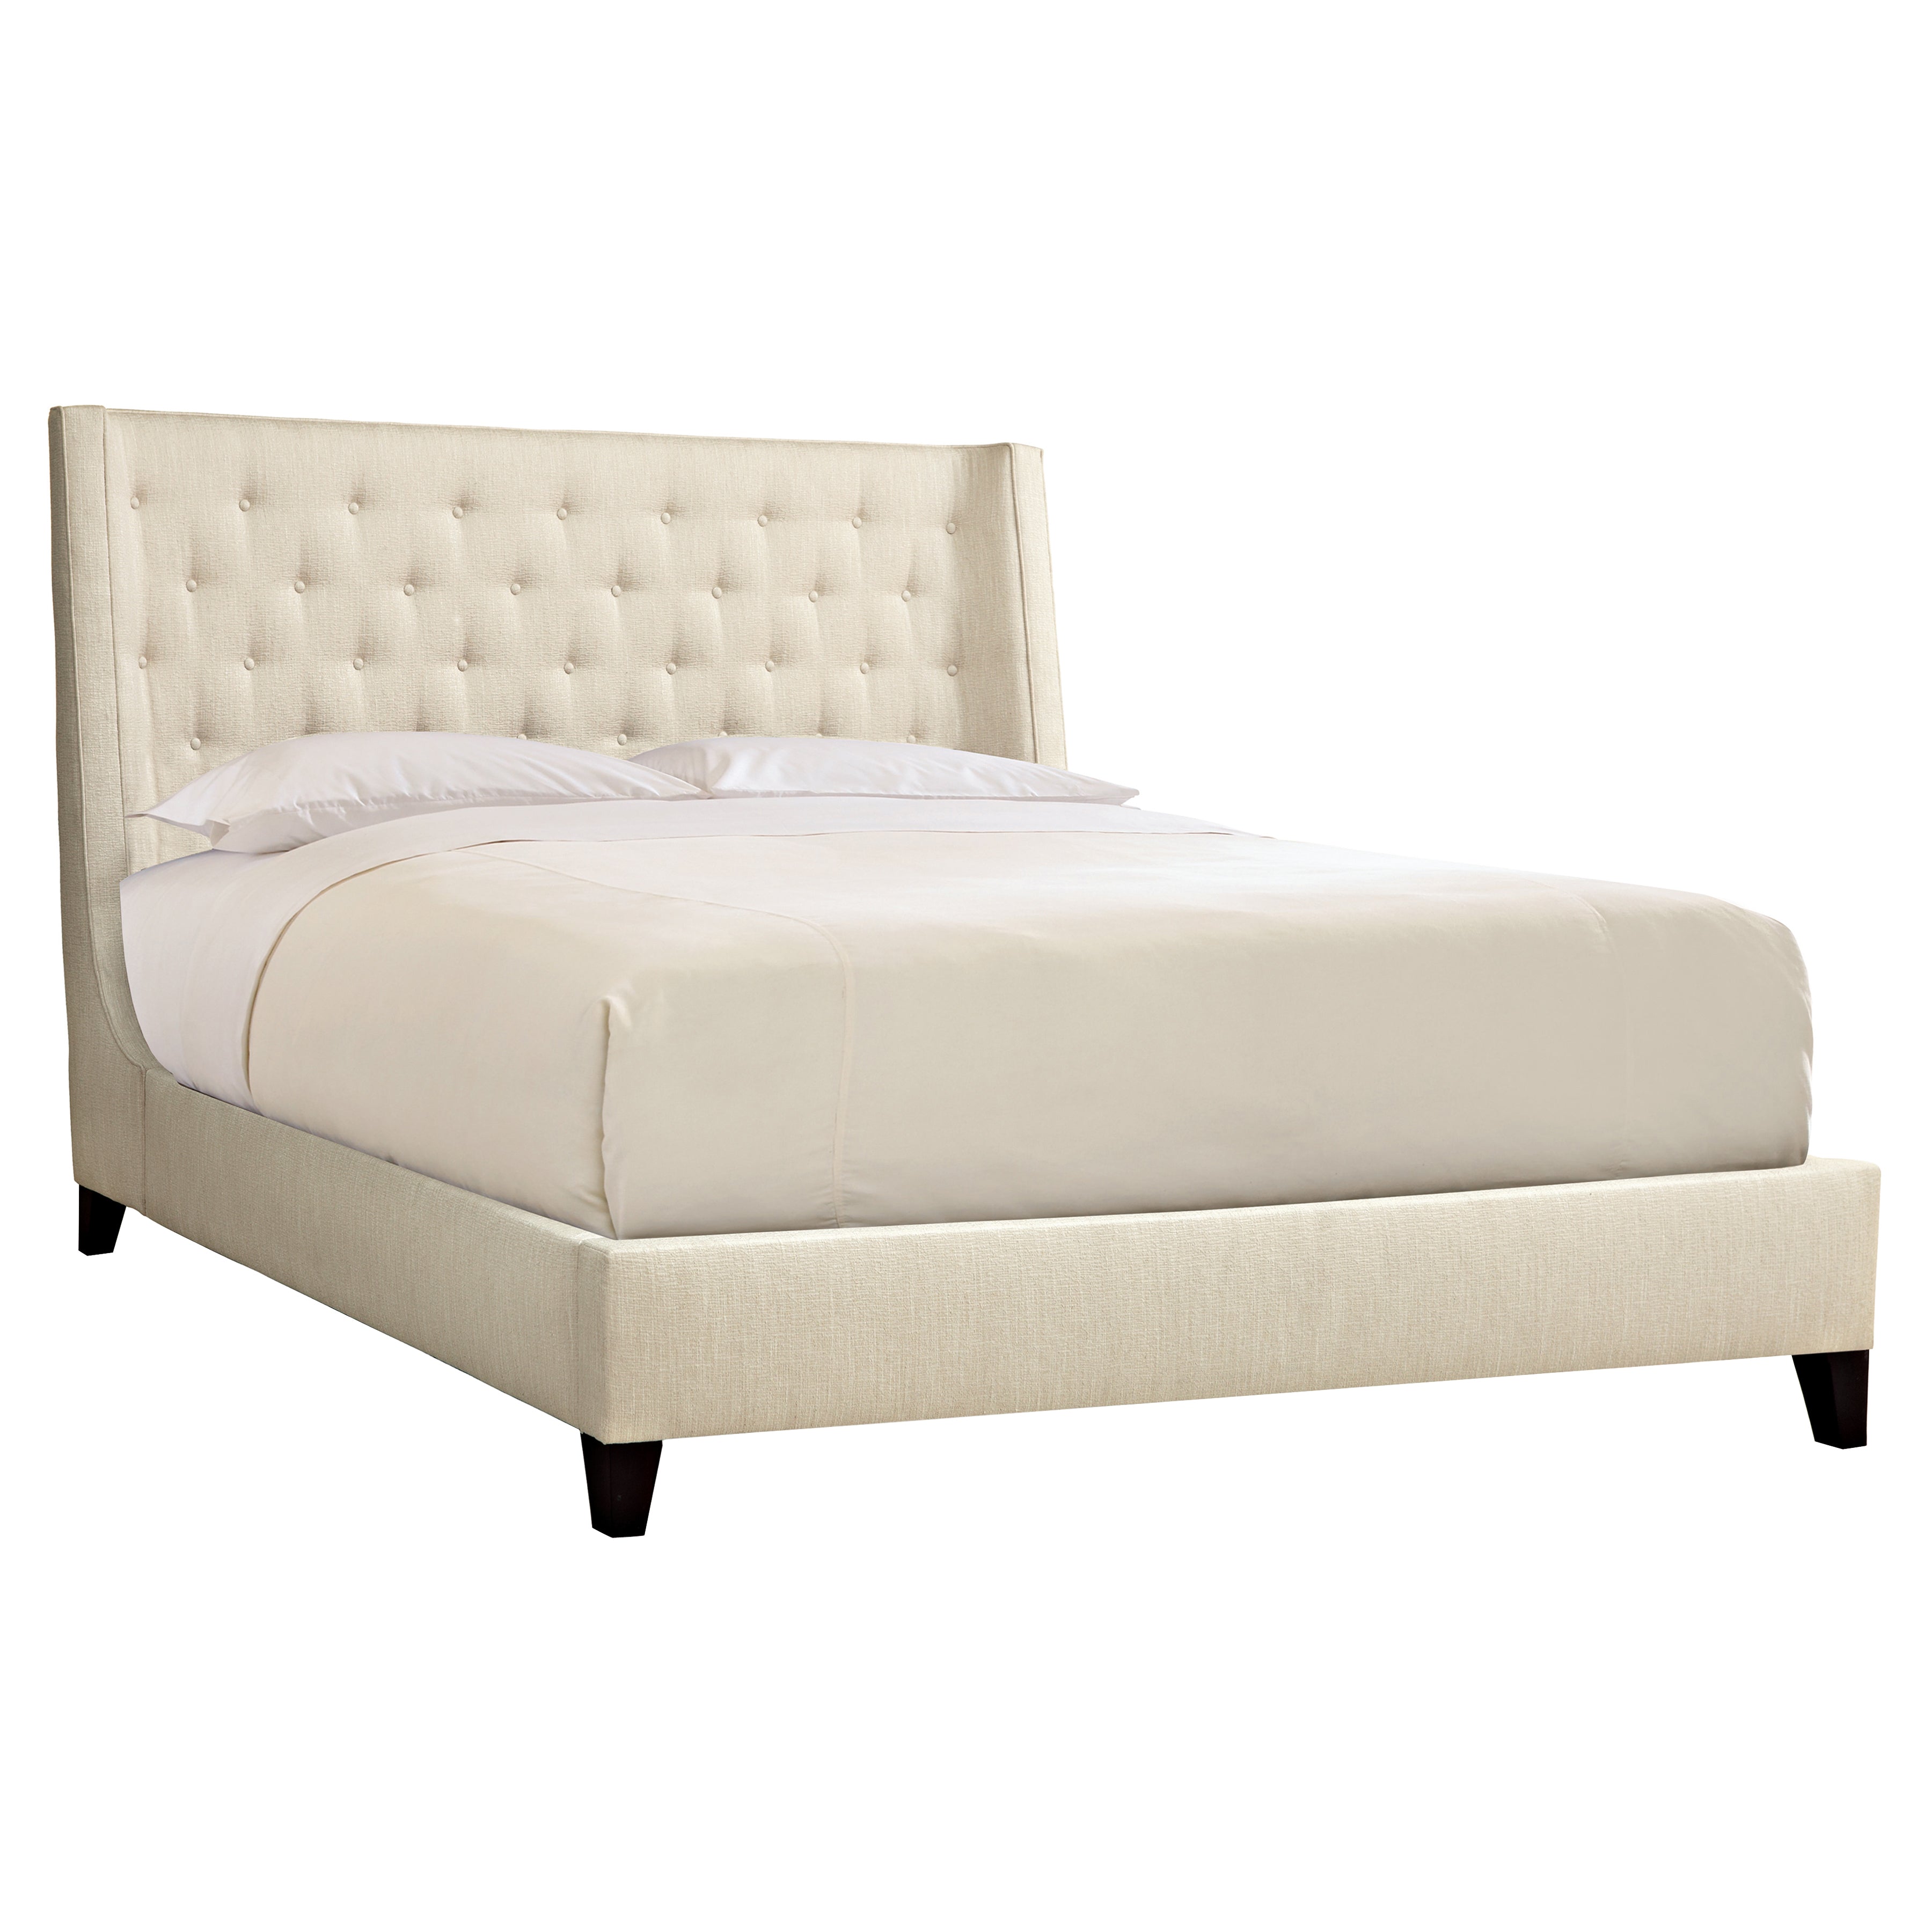 Maxime King Shelter Bed with Button Panel Headboard